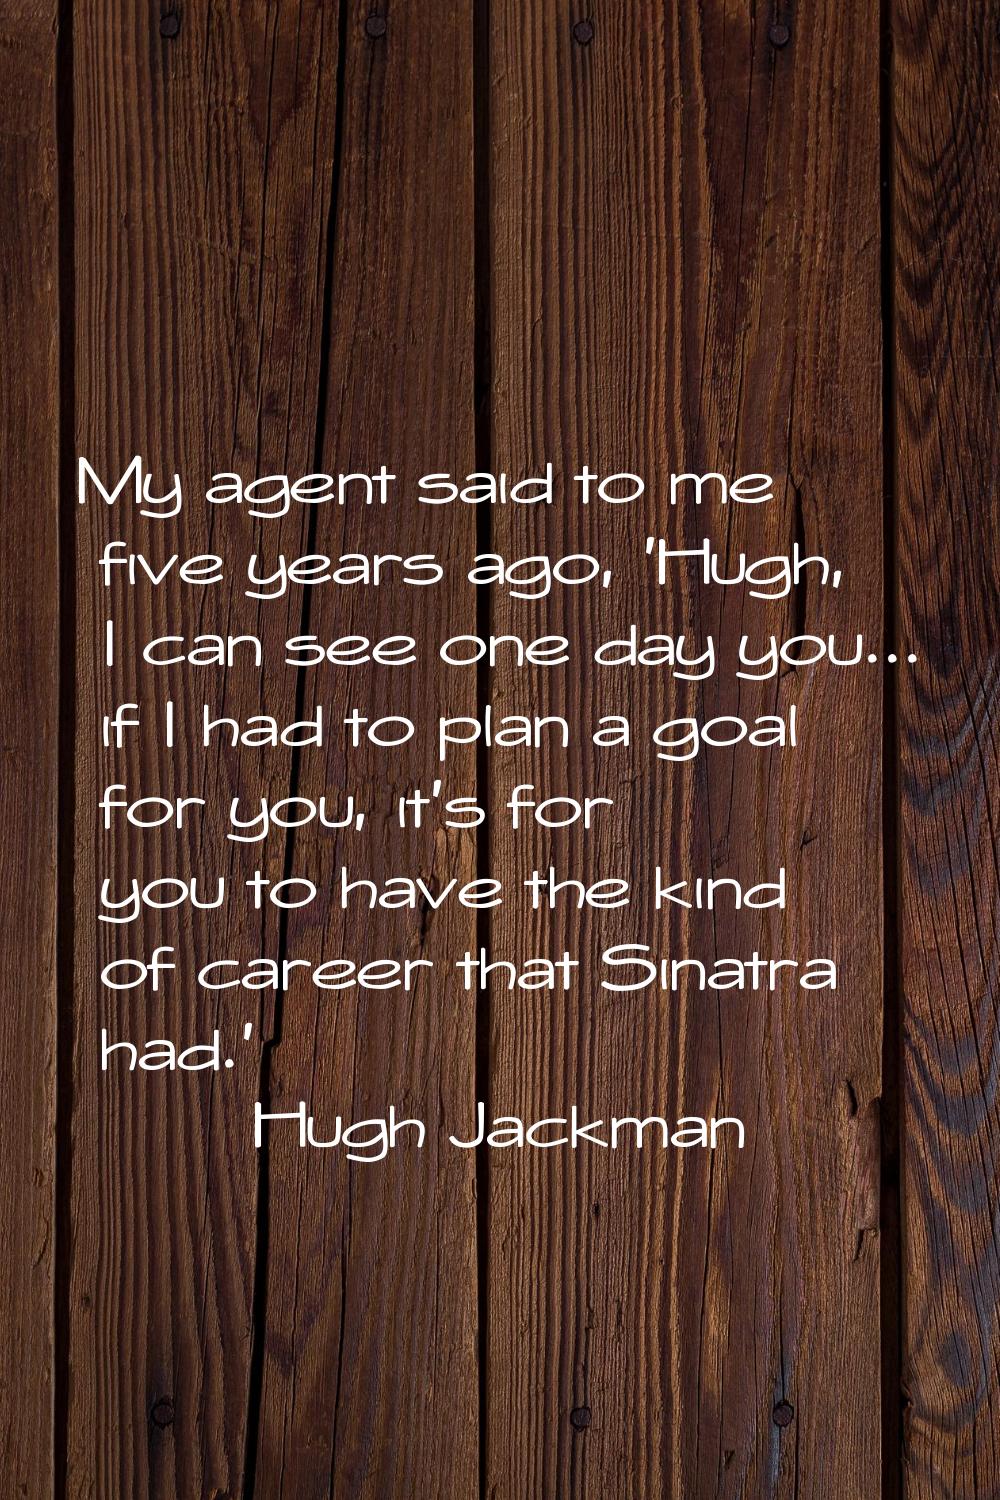 My agent said to me five years ago, 'Hugh, I can see one day you... if I had to plan a goal for you